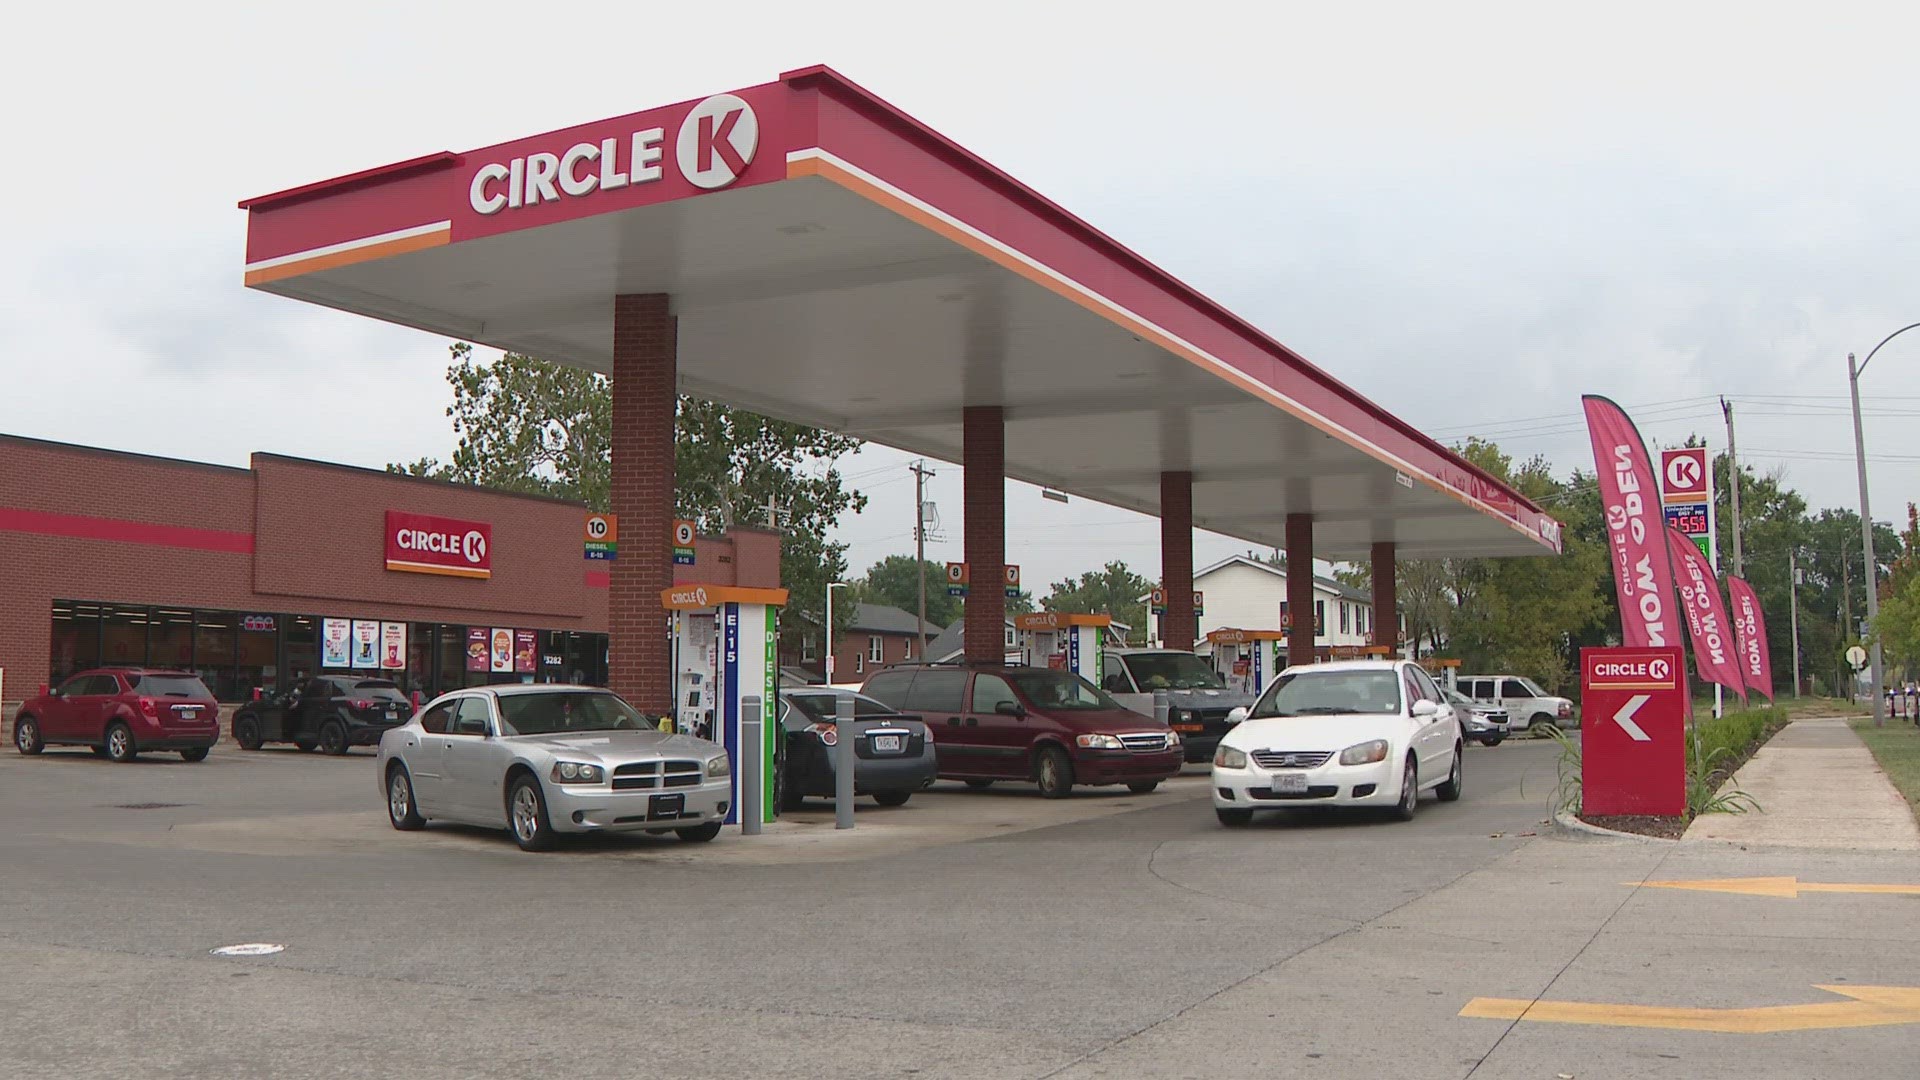 There has been an apparent mix-up at a St. Louis gas station. It's currently causing a lot of area frustration.